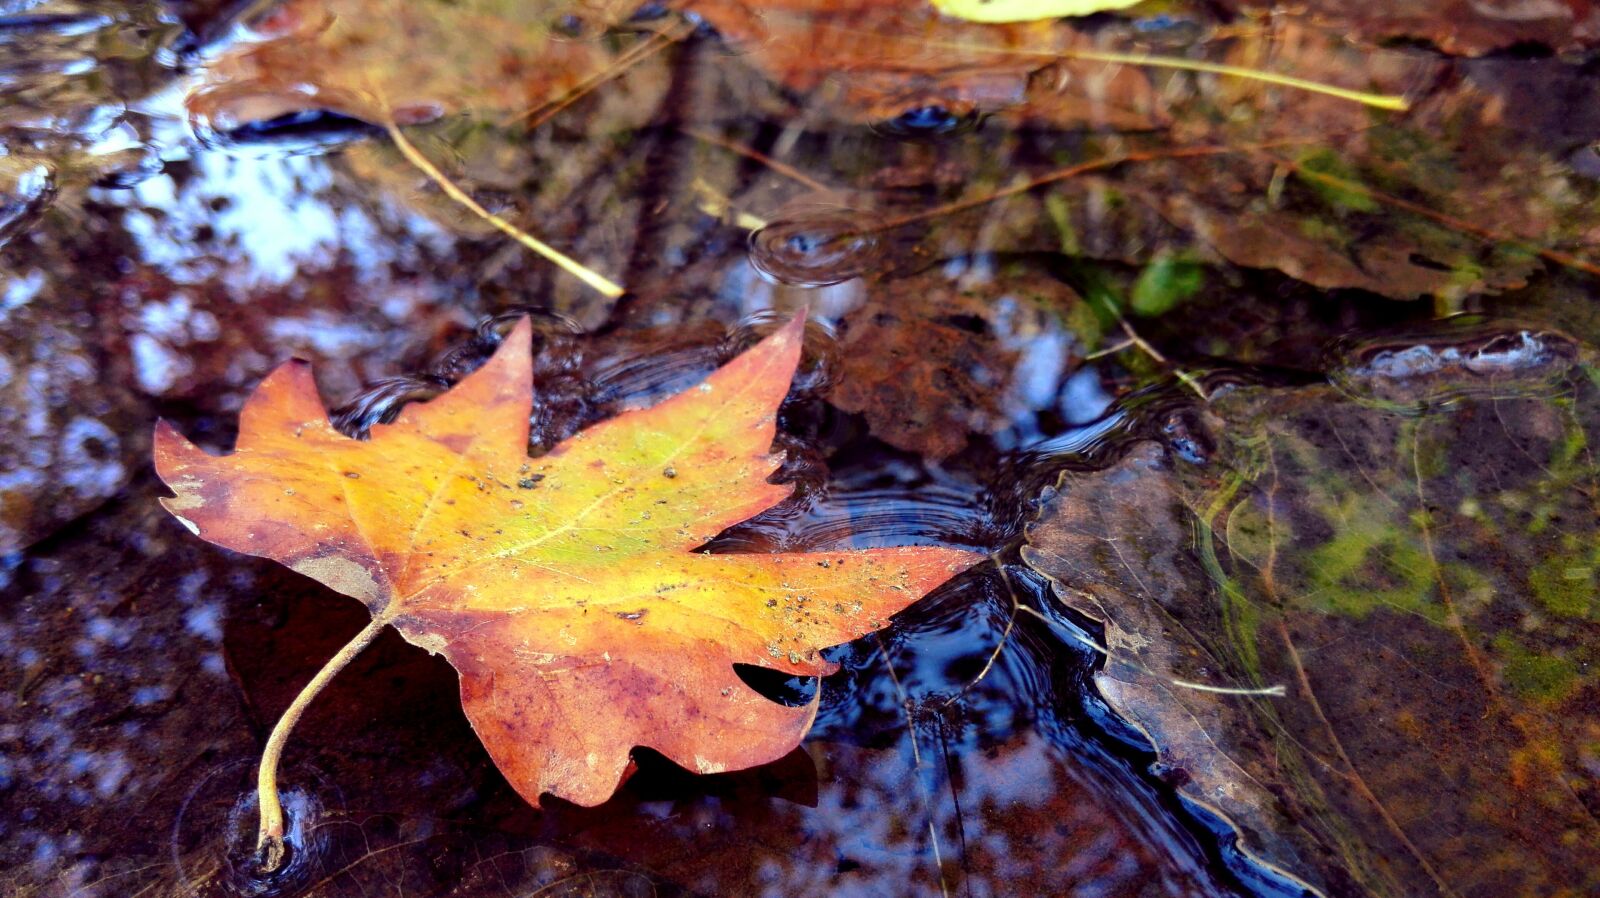 HUAWEI Mate 7 sample photo. Leaves, autumn, water photography